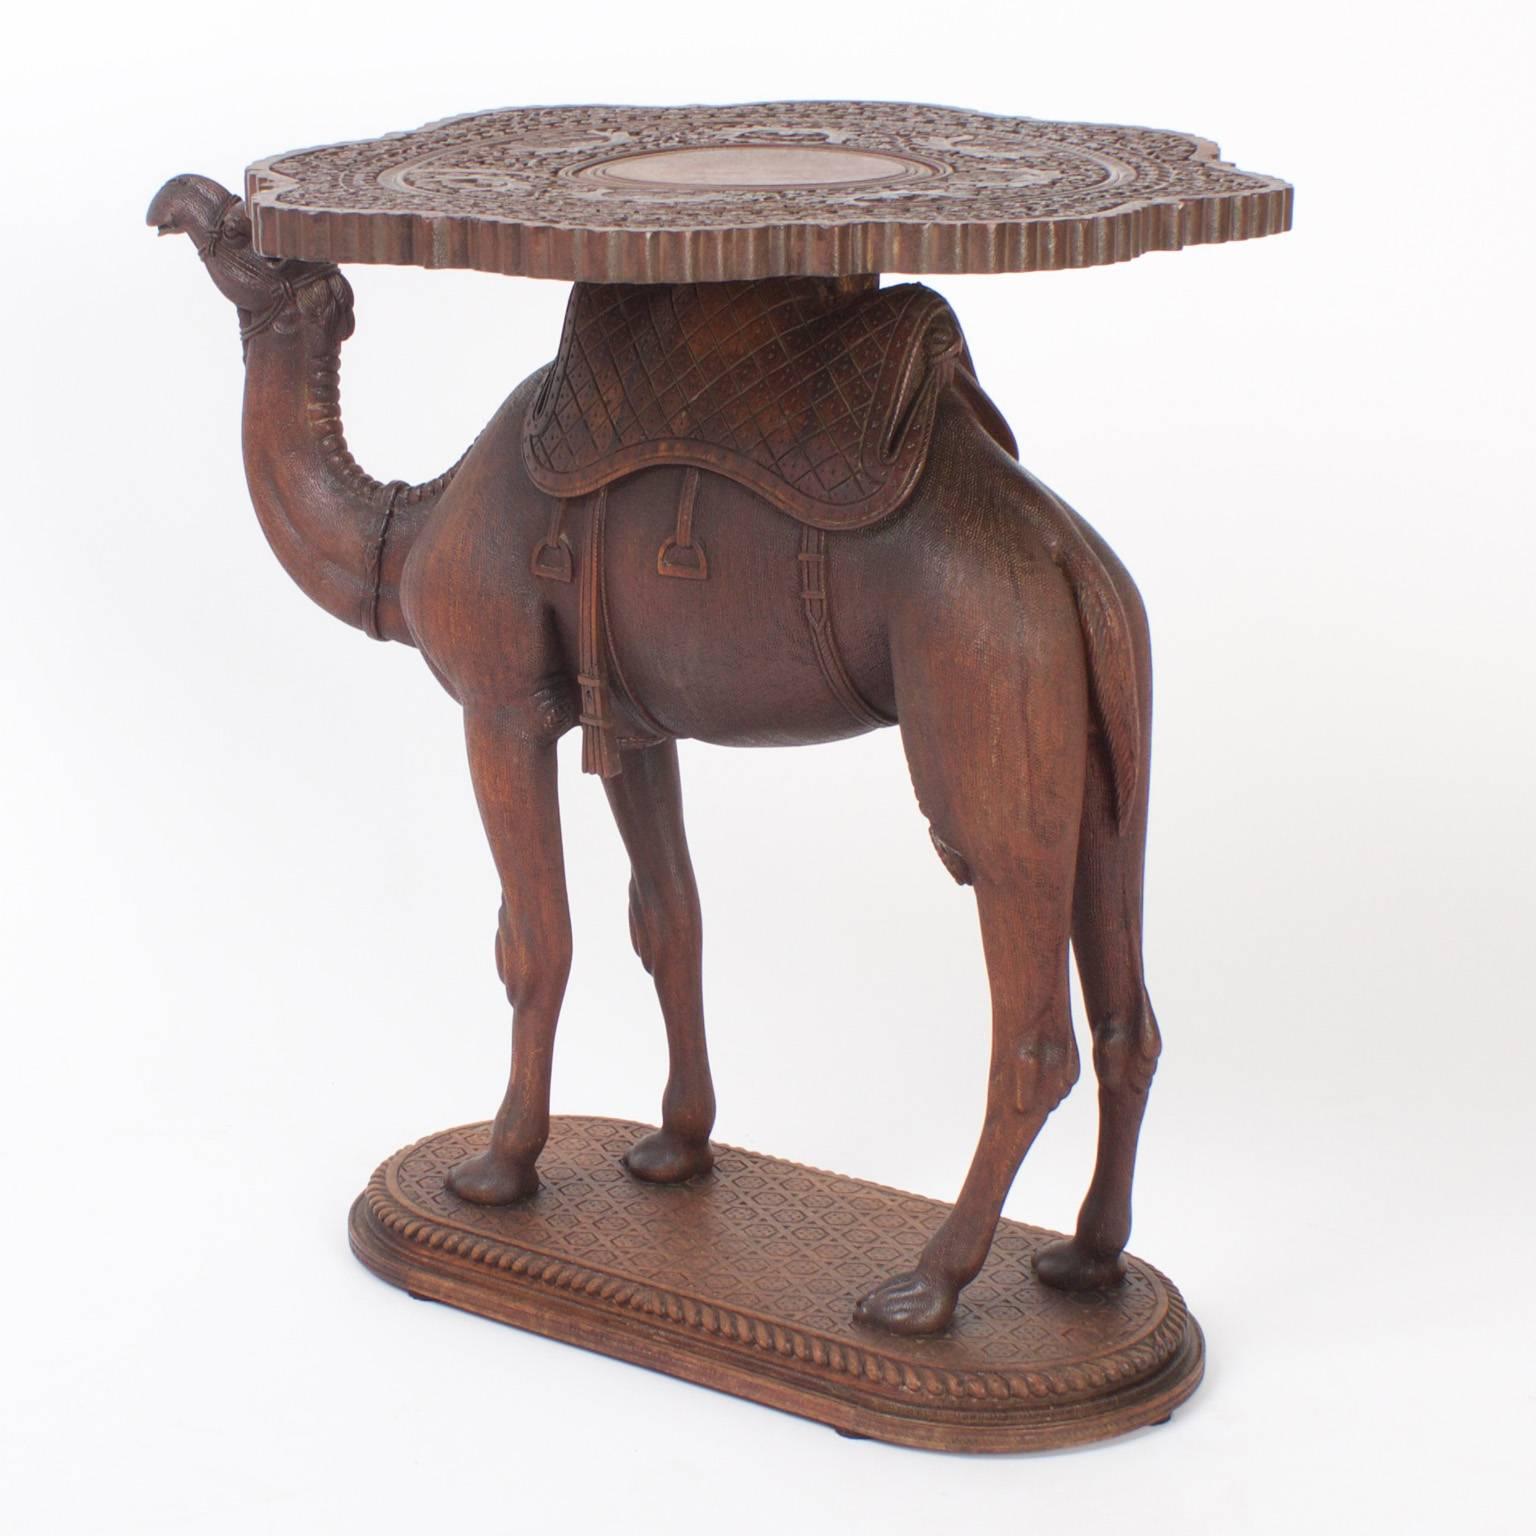 Inspired and rare antique Anglo Indian camel table carved from exotic hardwood with surprising attention to detail ,complete with a saddle supporting a floral carved table top.
